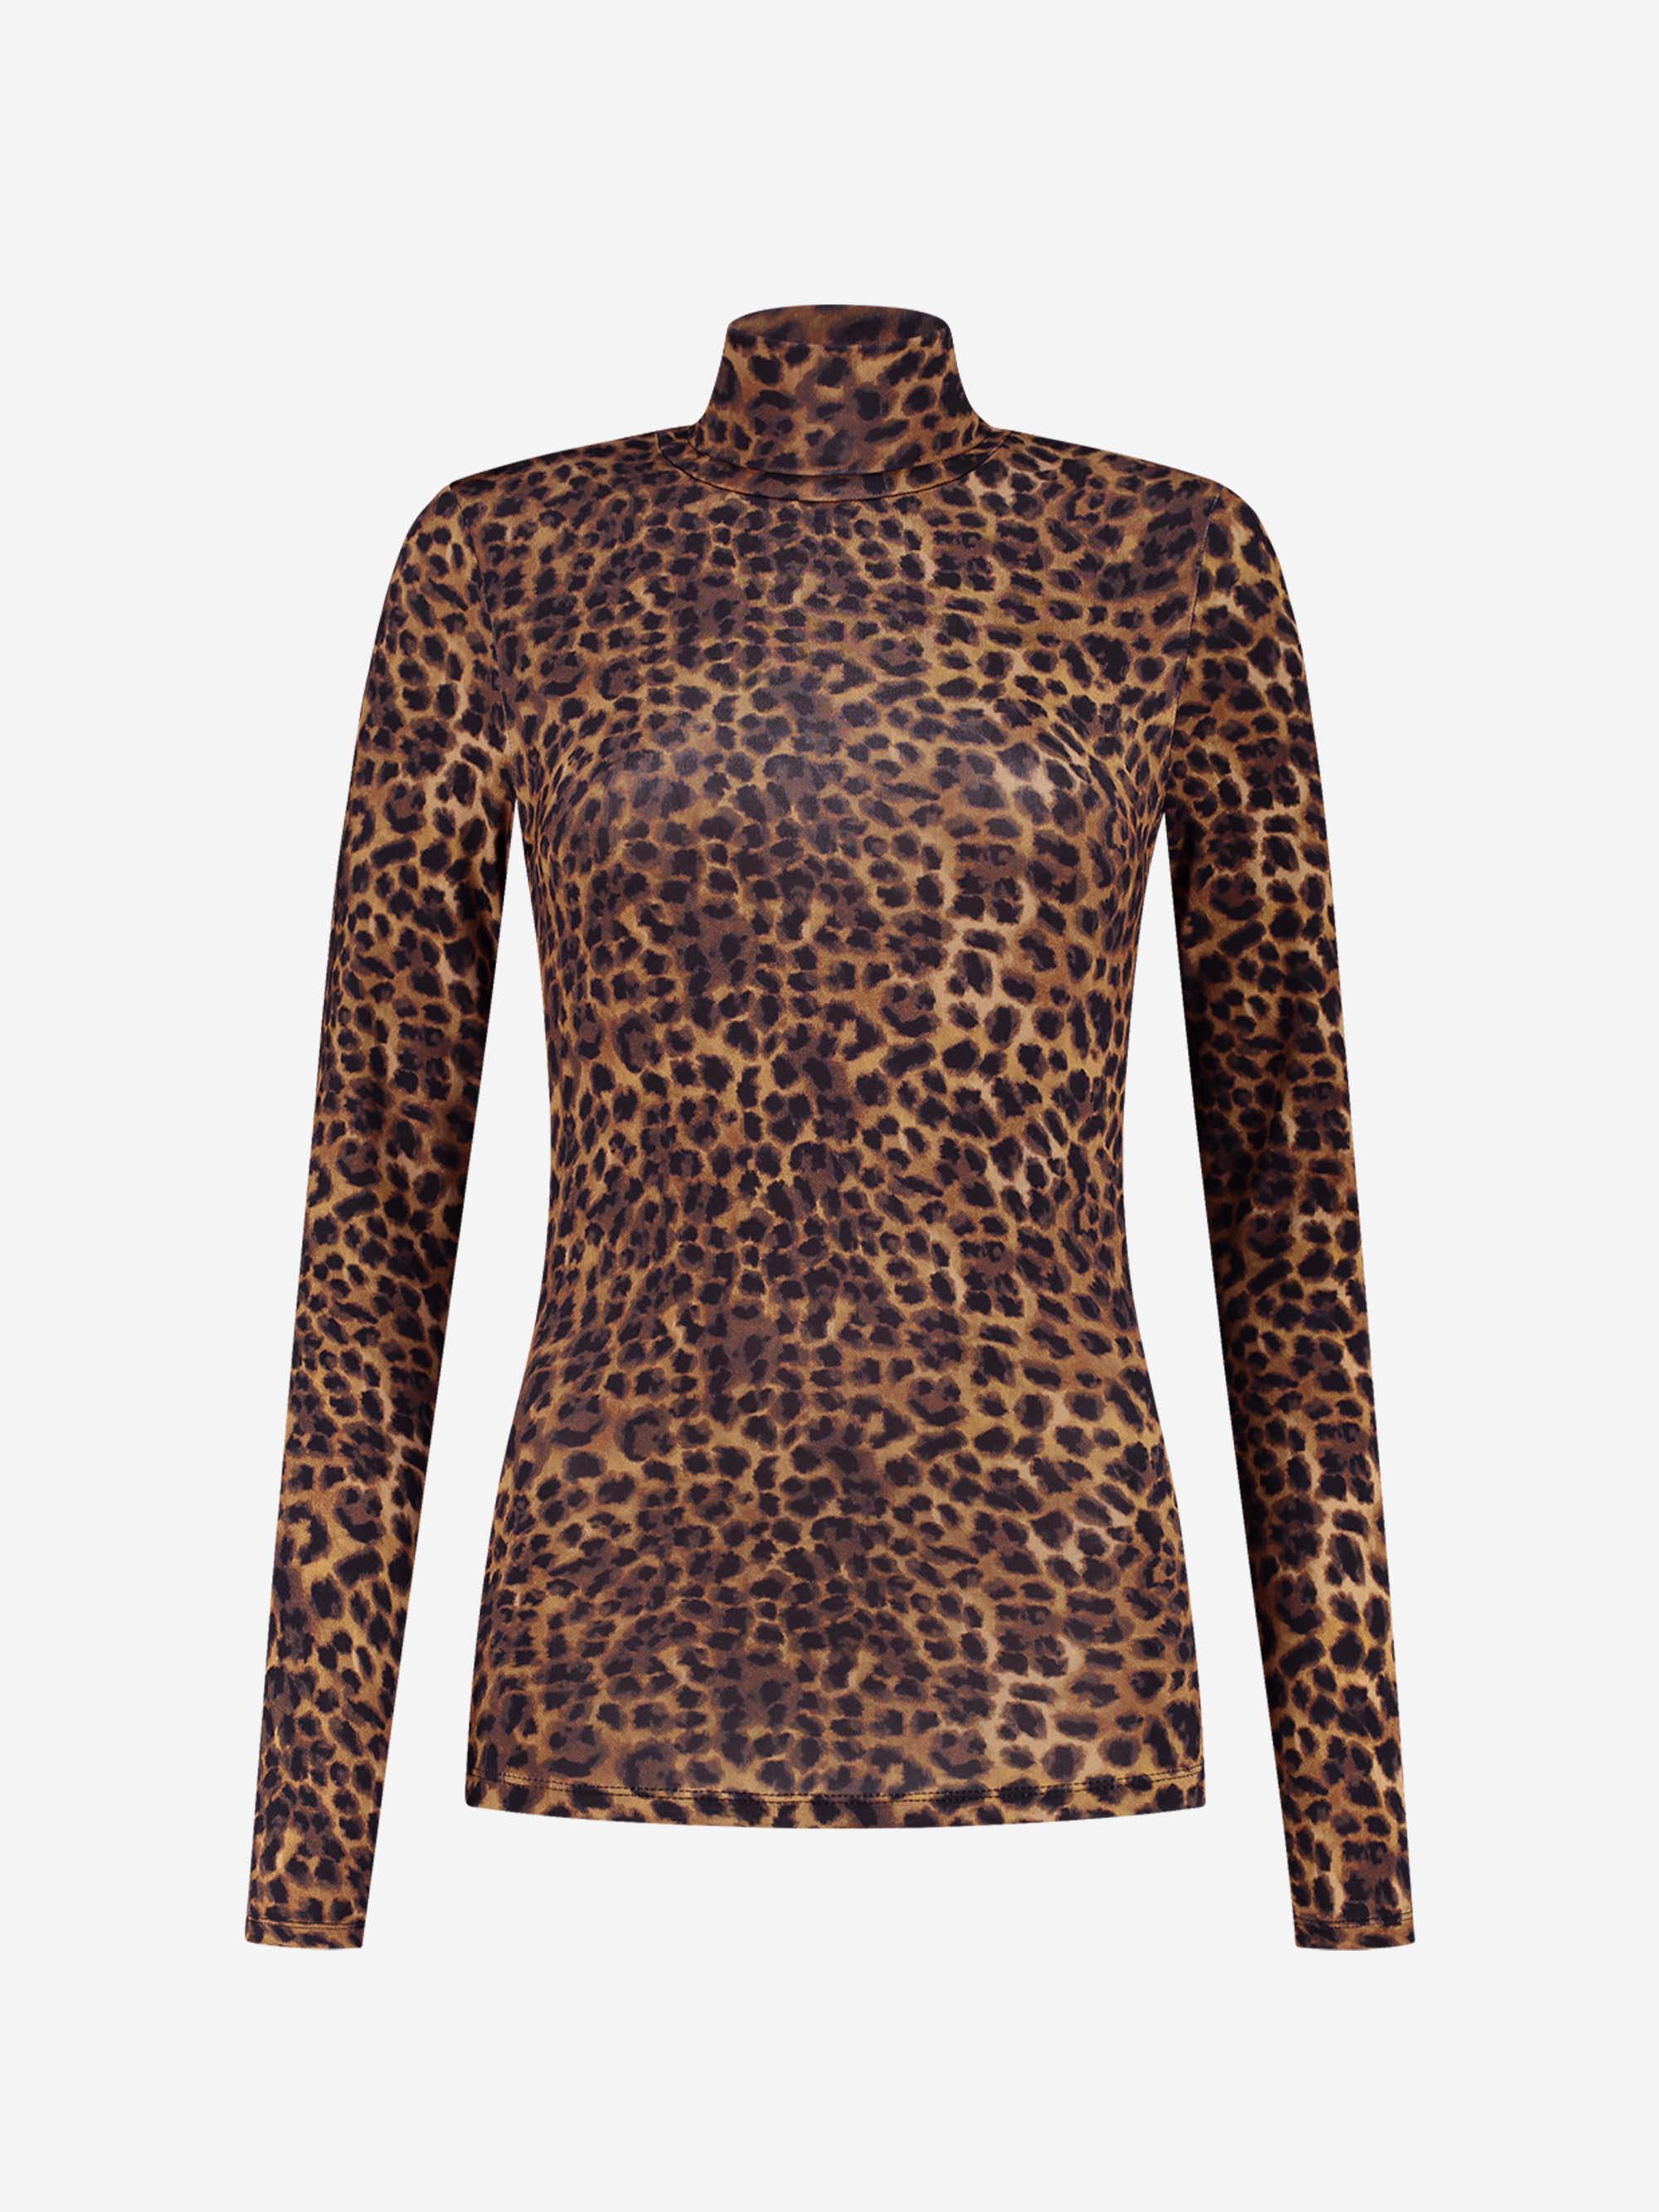  Fitted Leopard print top with turtleneck  